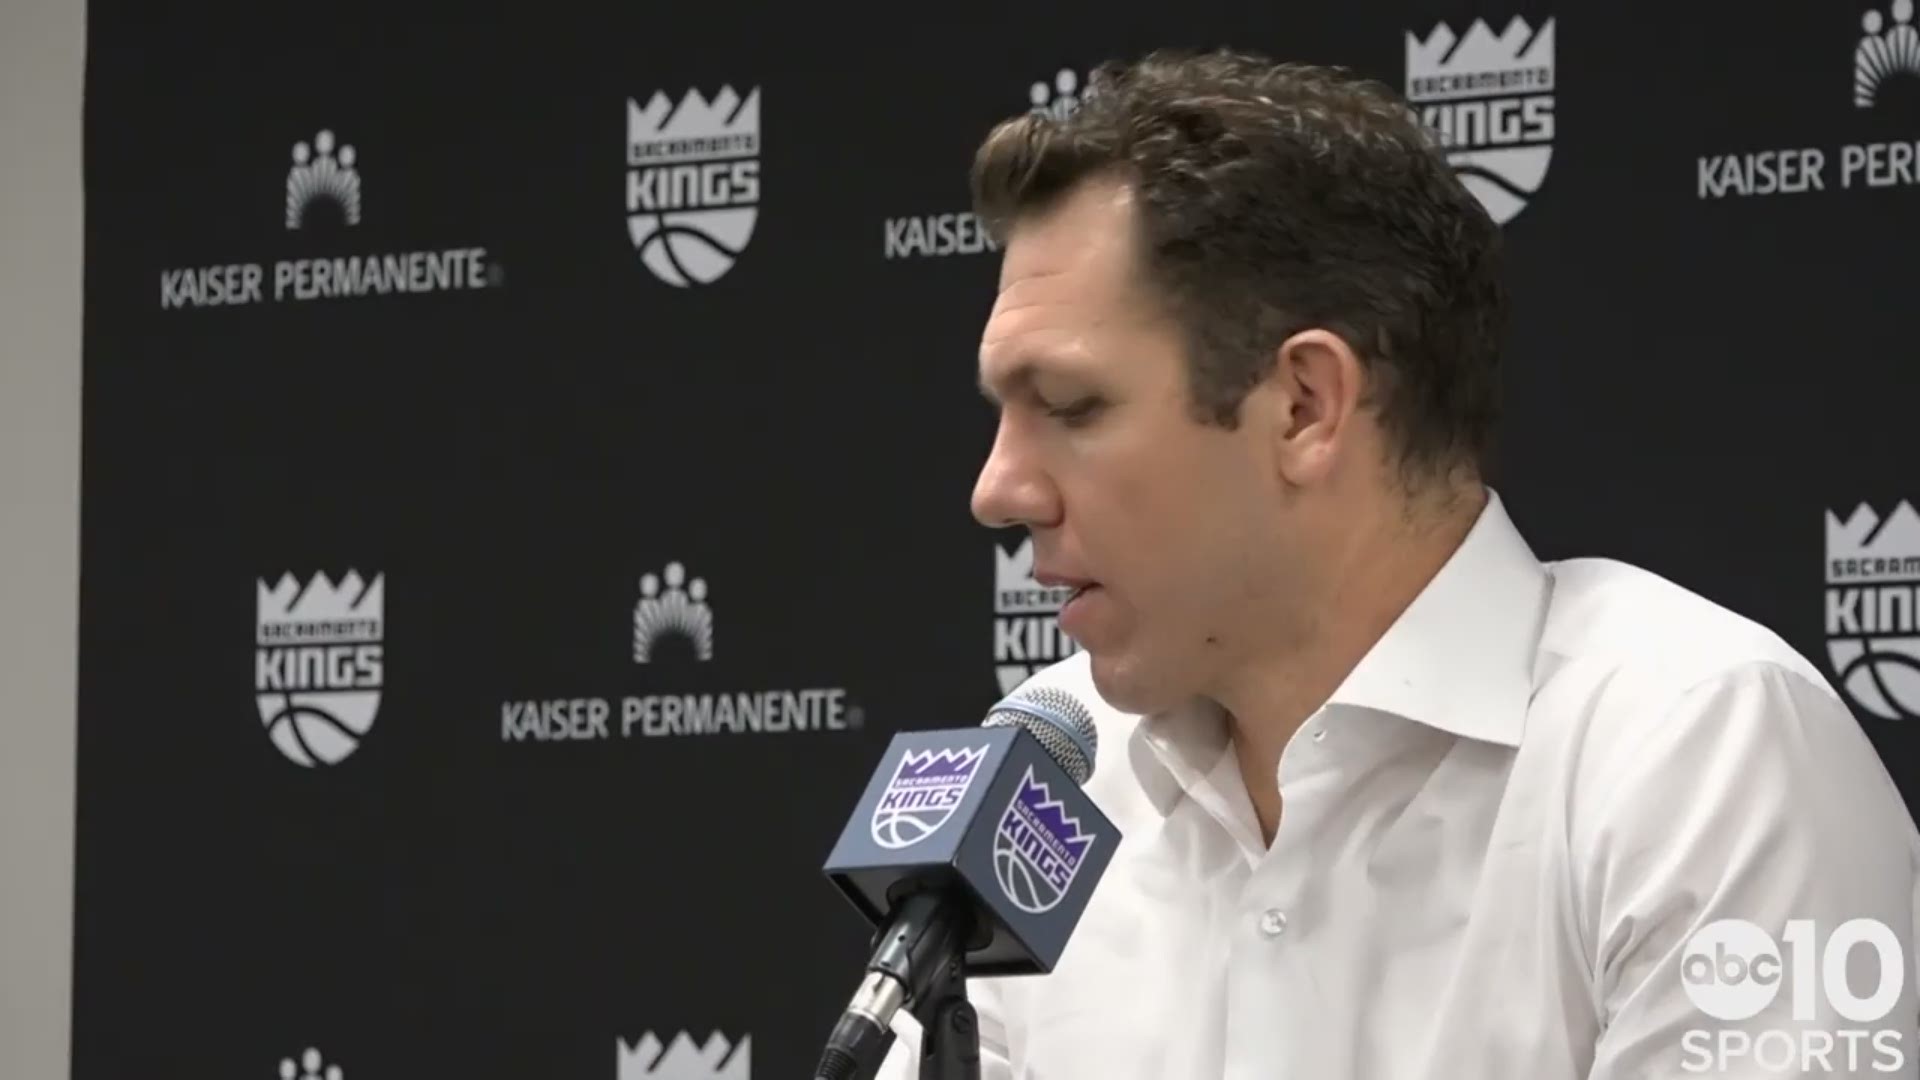 Kings coach Luke Walton feels his team lost composure on defense and wilted to the physicality of the Knicks, as New York snapped their three-game win streak.